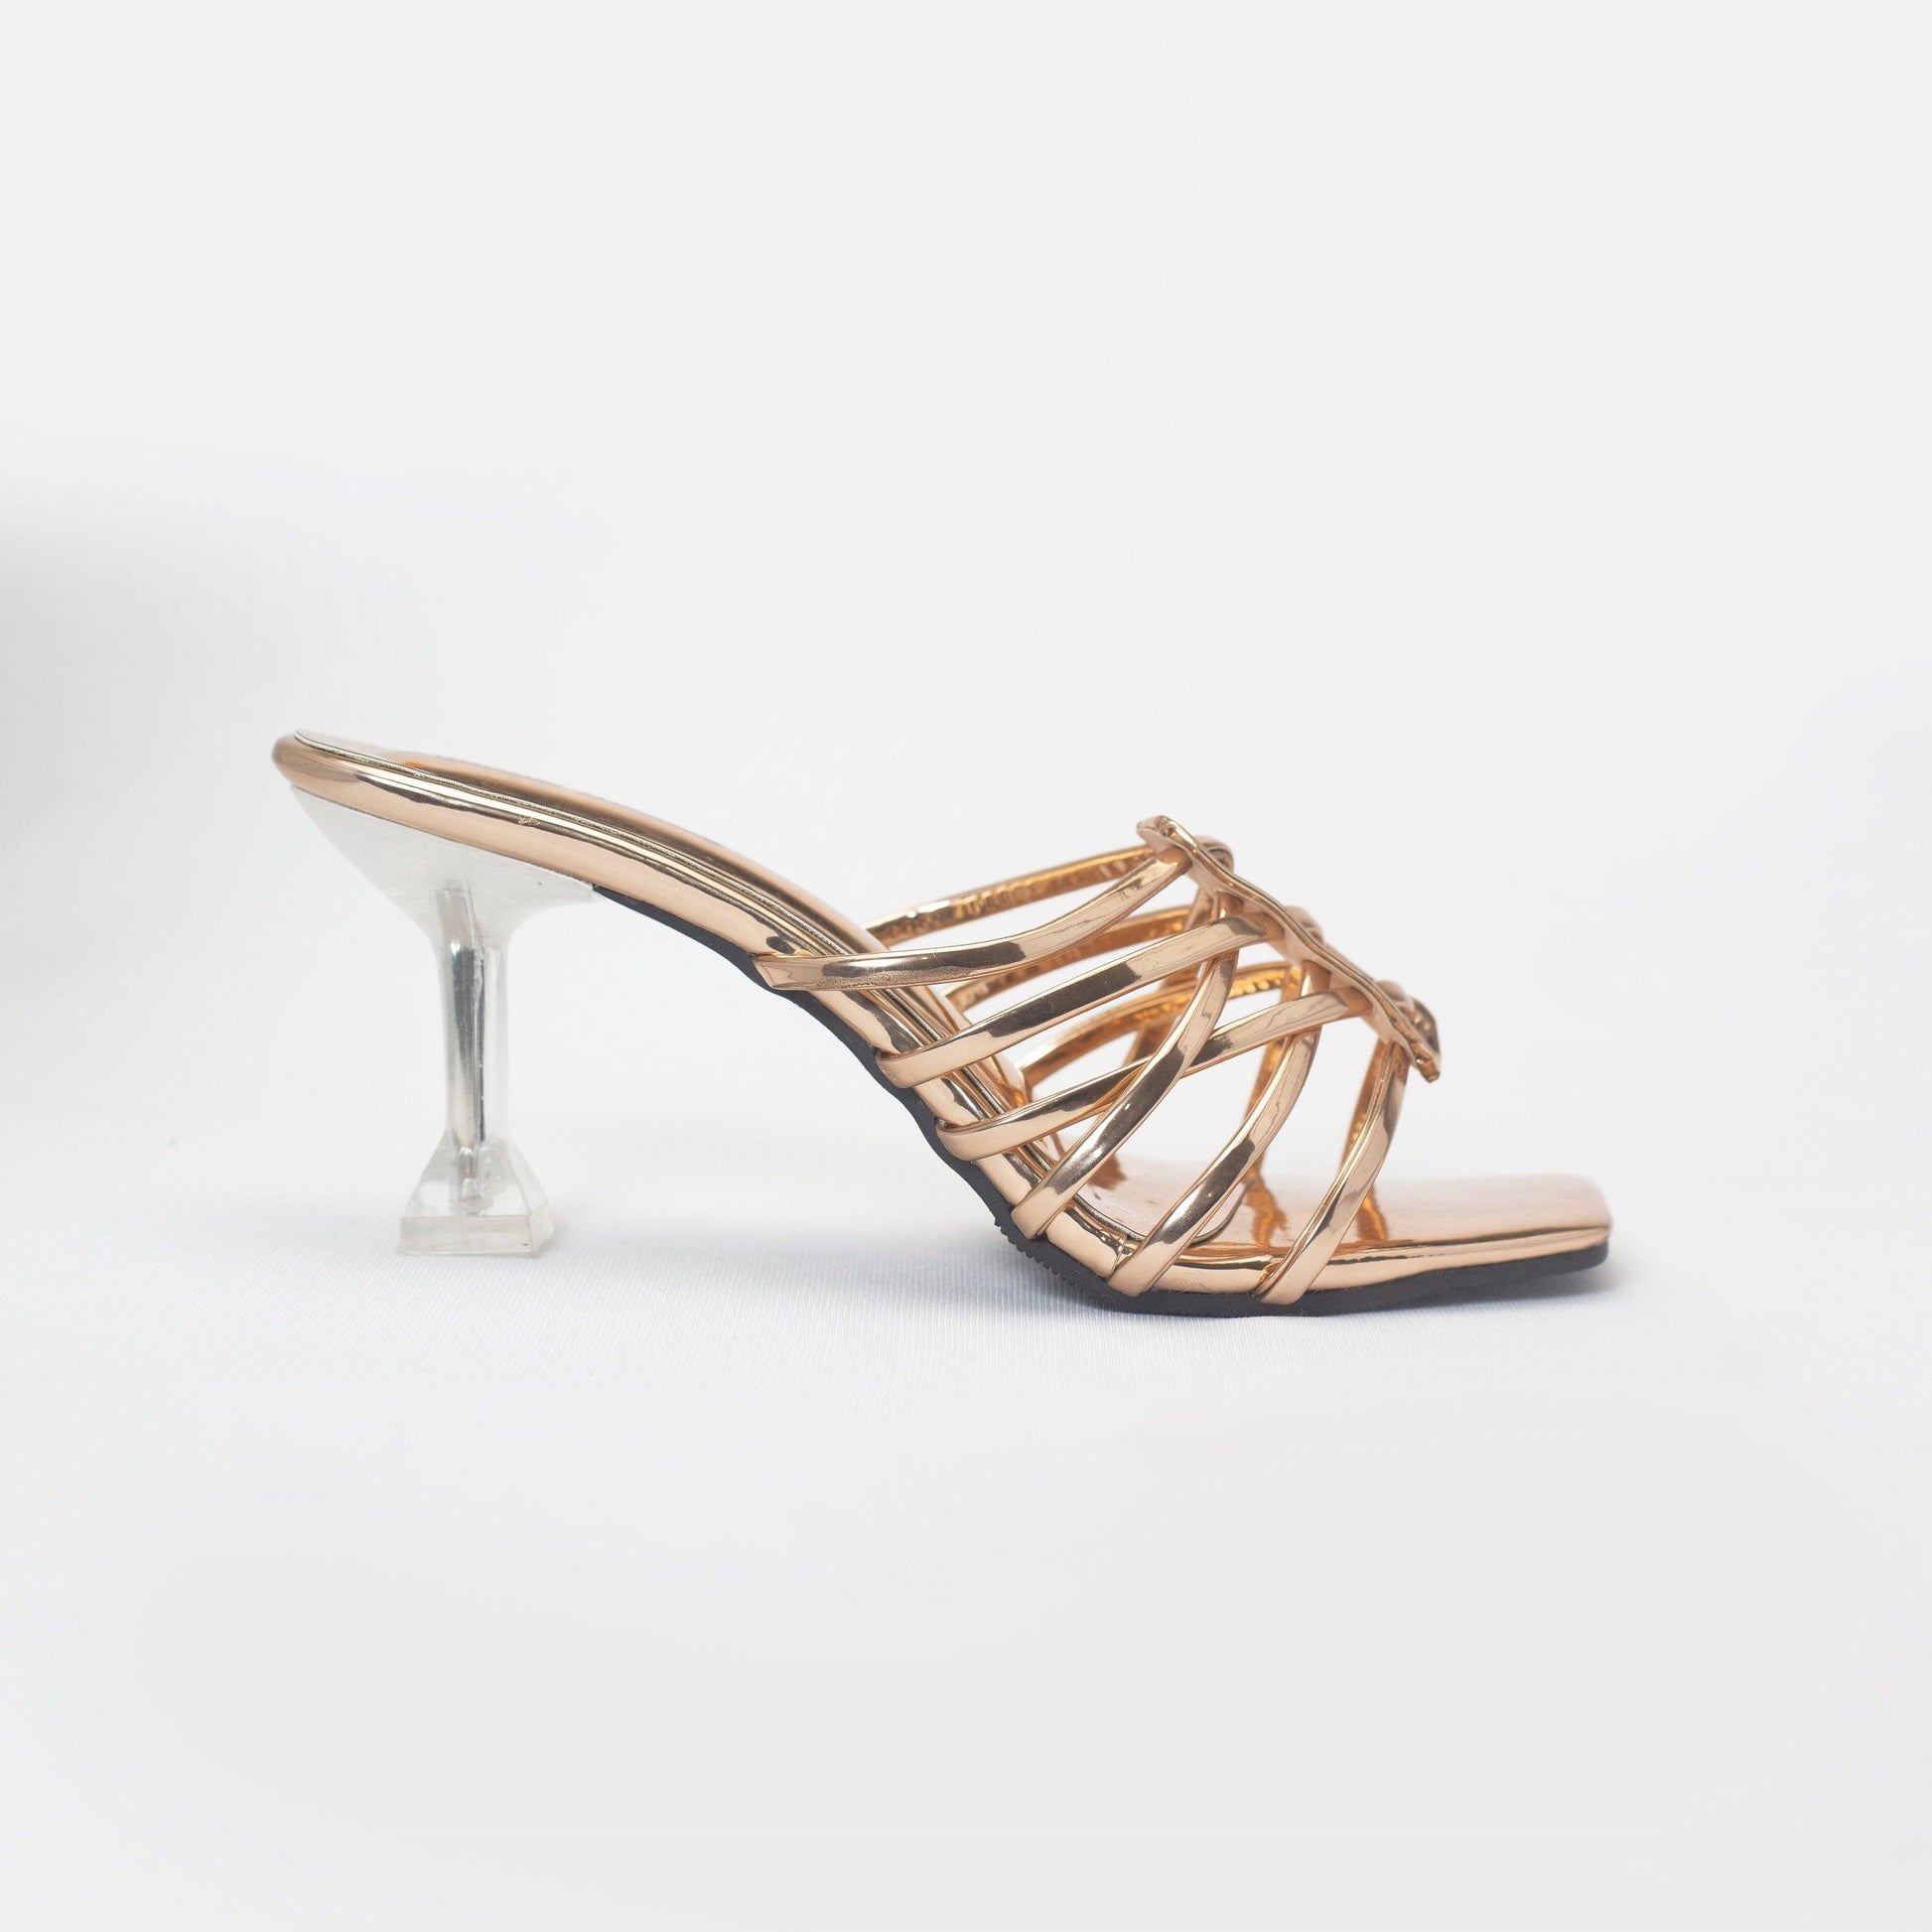 3 inch rose gold clear heel shoes-nawabi shoes bd